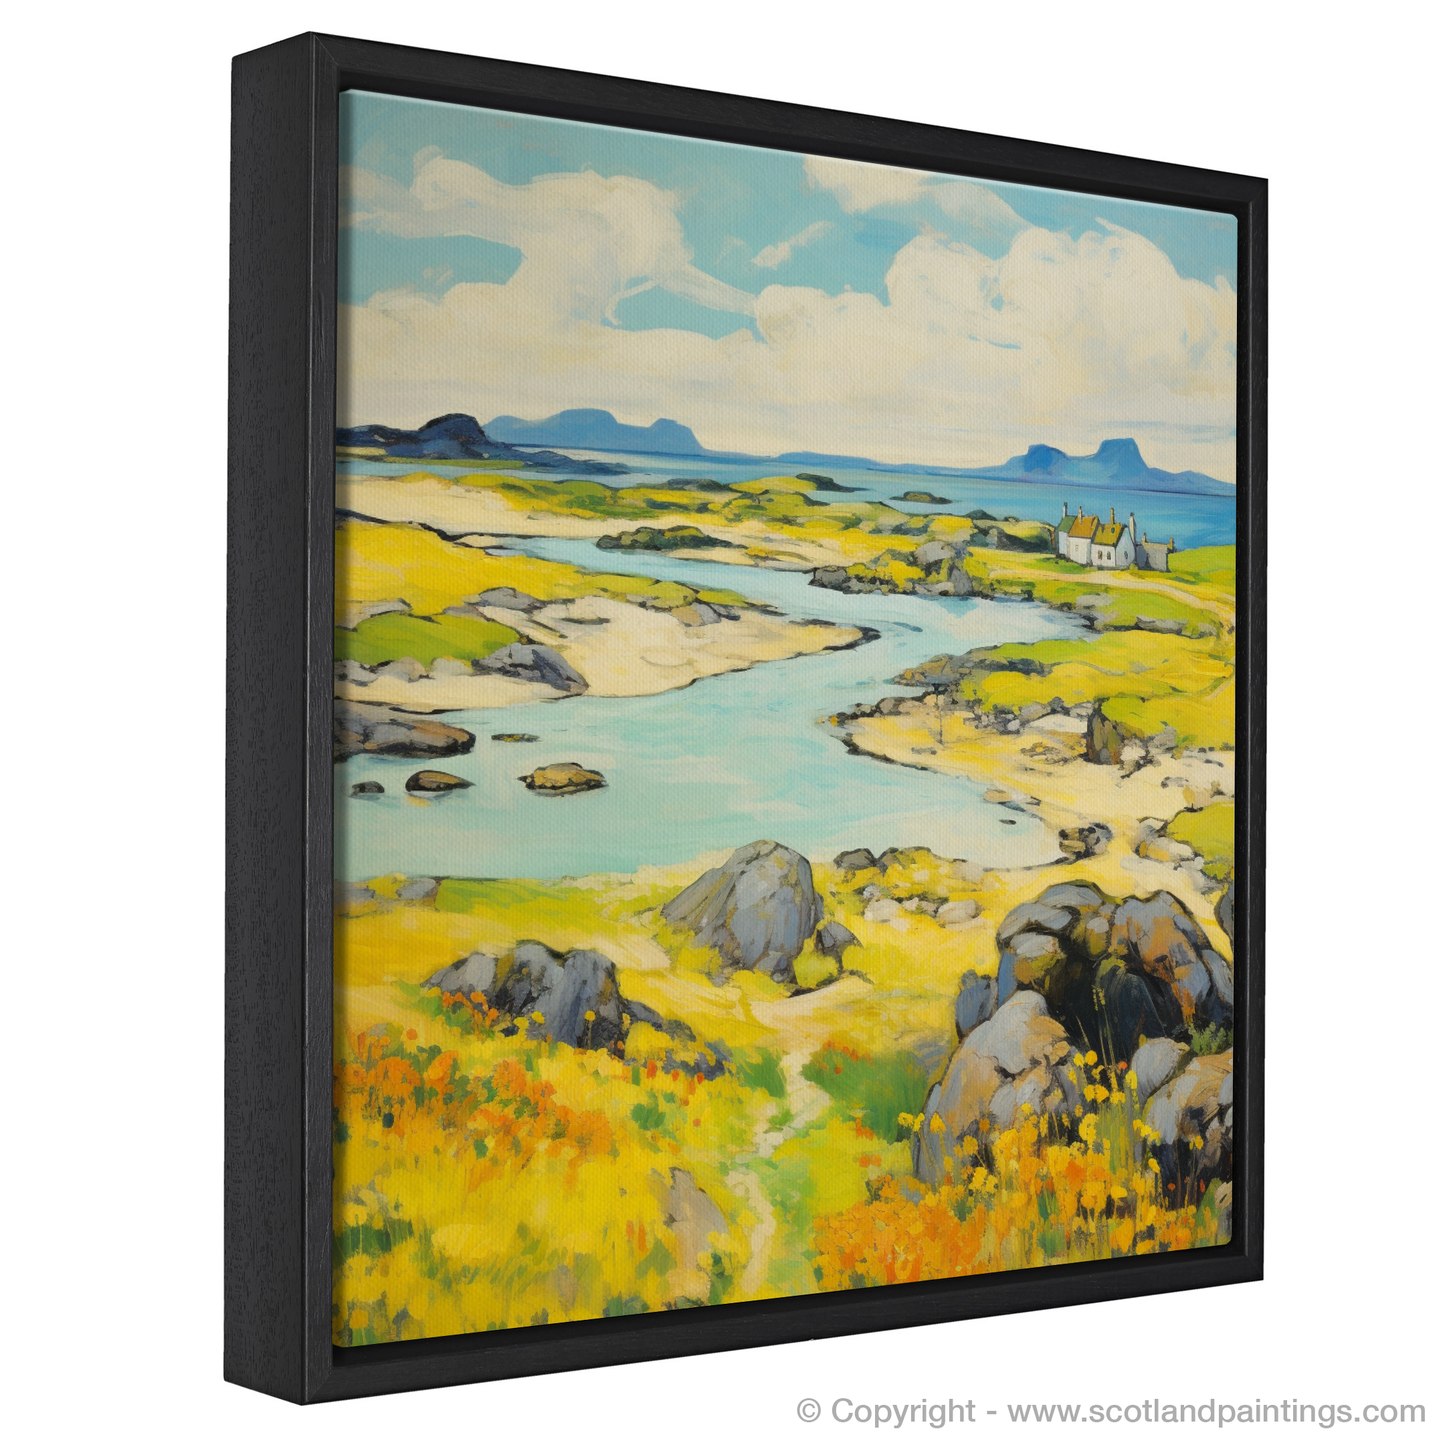 Painting and Art Print of Isle of Lewis, Outer Hebrides in summer entitled "Summer Serenity on the Isle of Lewis".